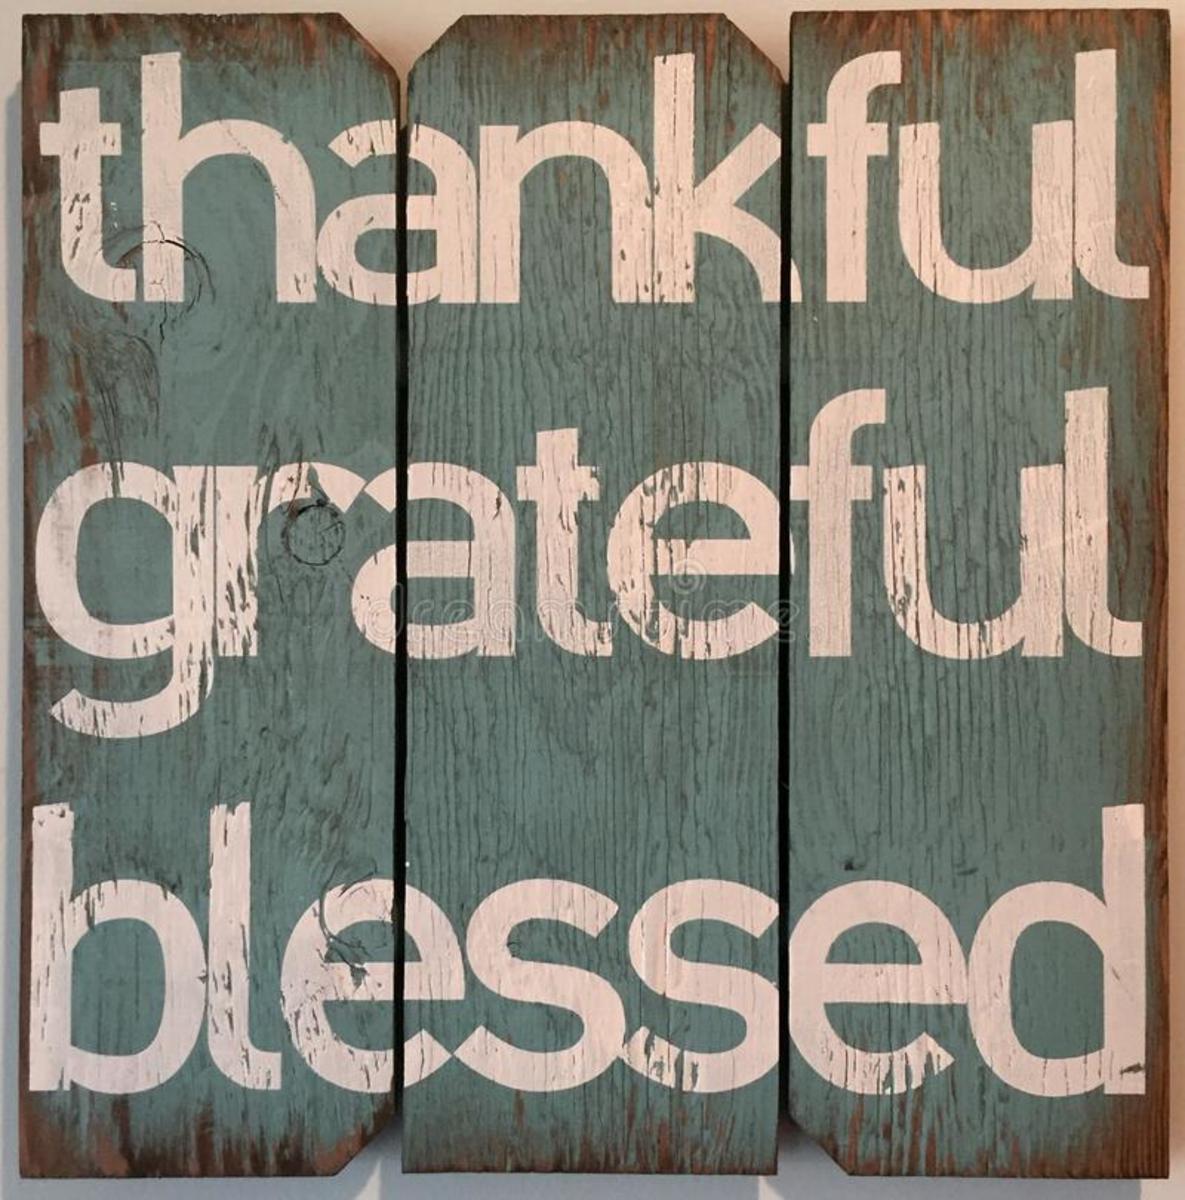 Giving Thanks: Why We Should Count Our Blessings Everyday